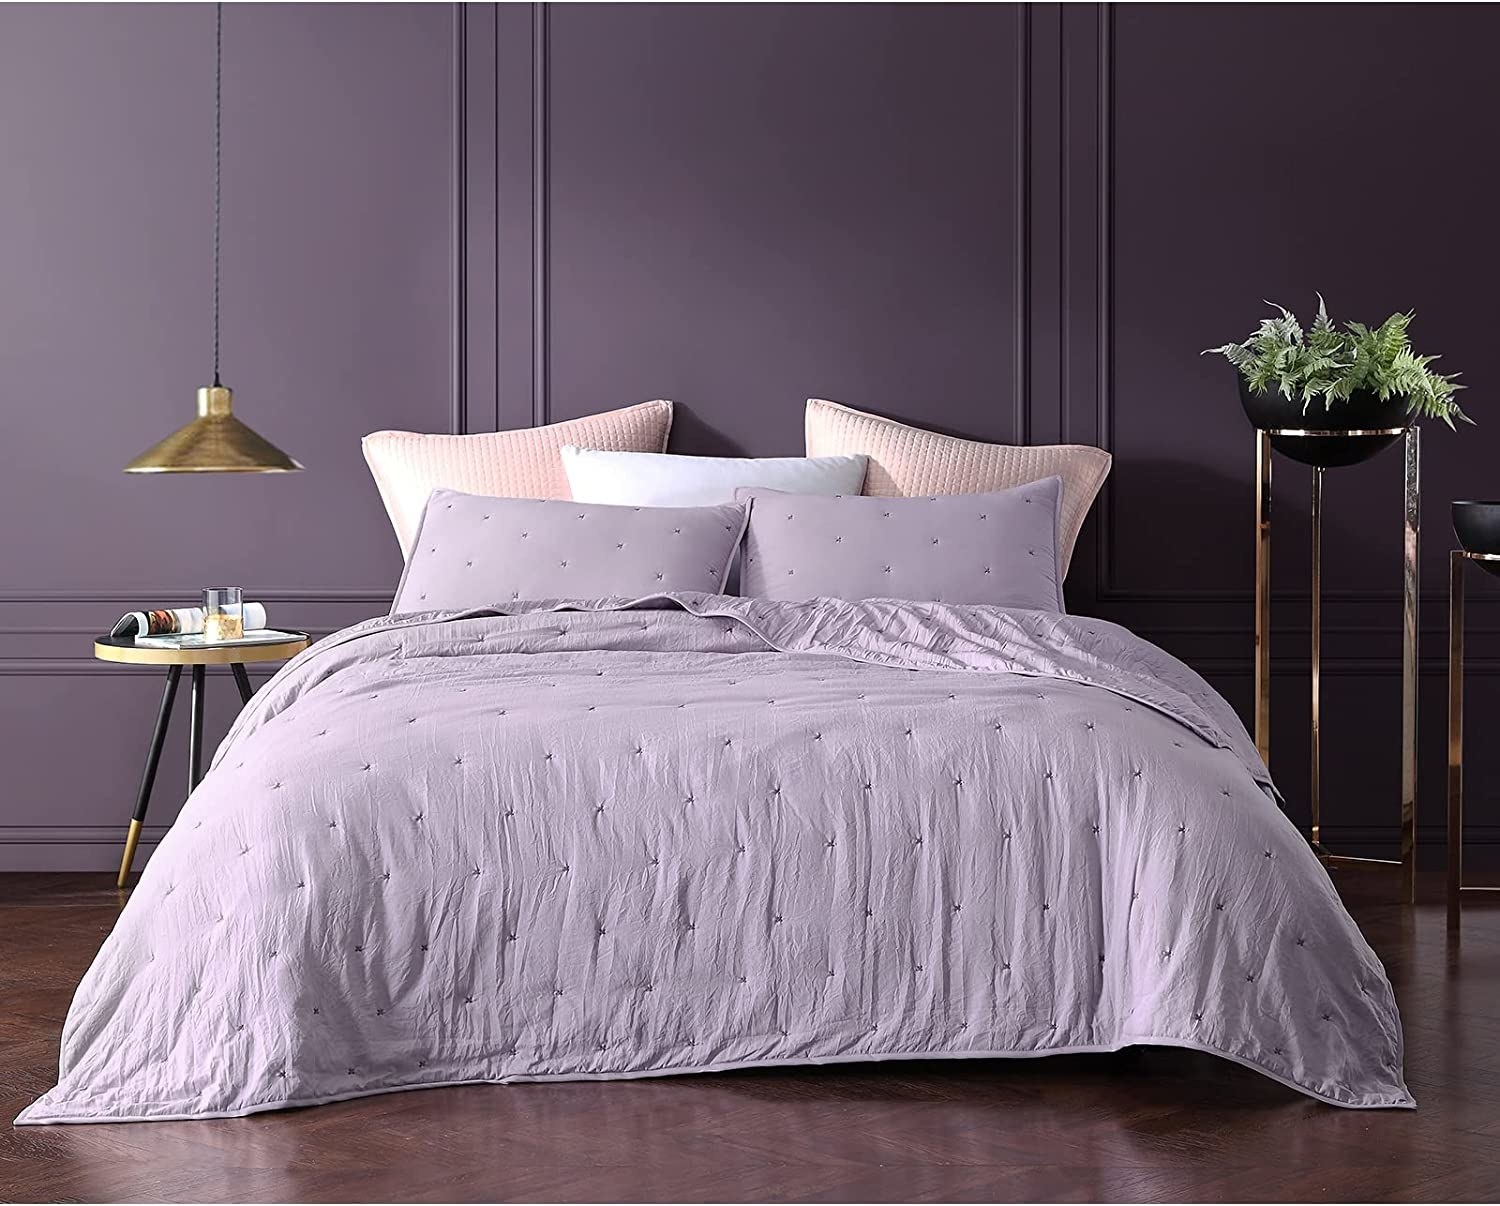 a soft microfibre bedspread arranged neatly on a bed